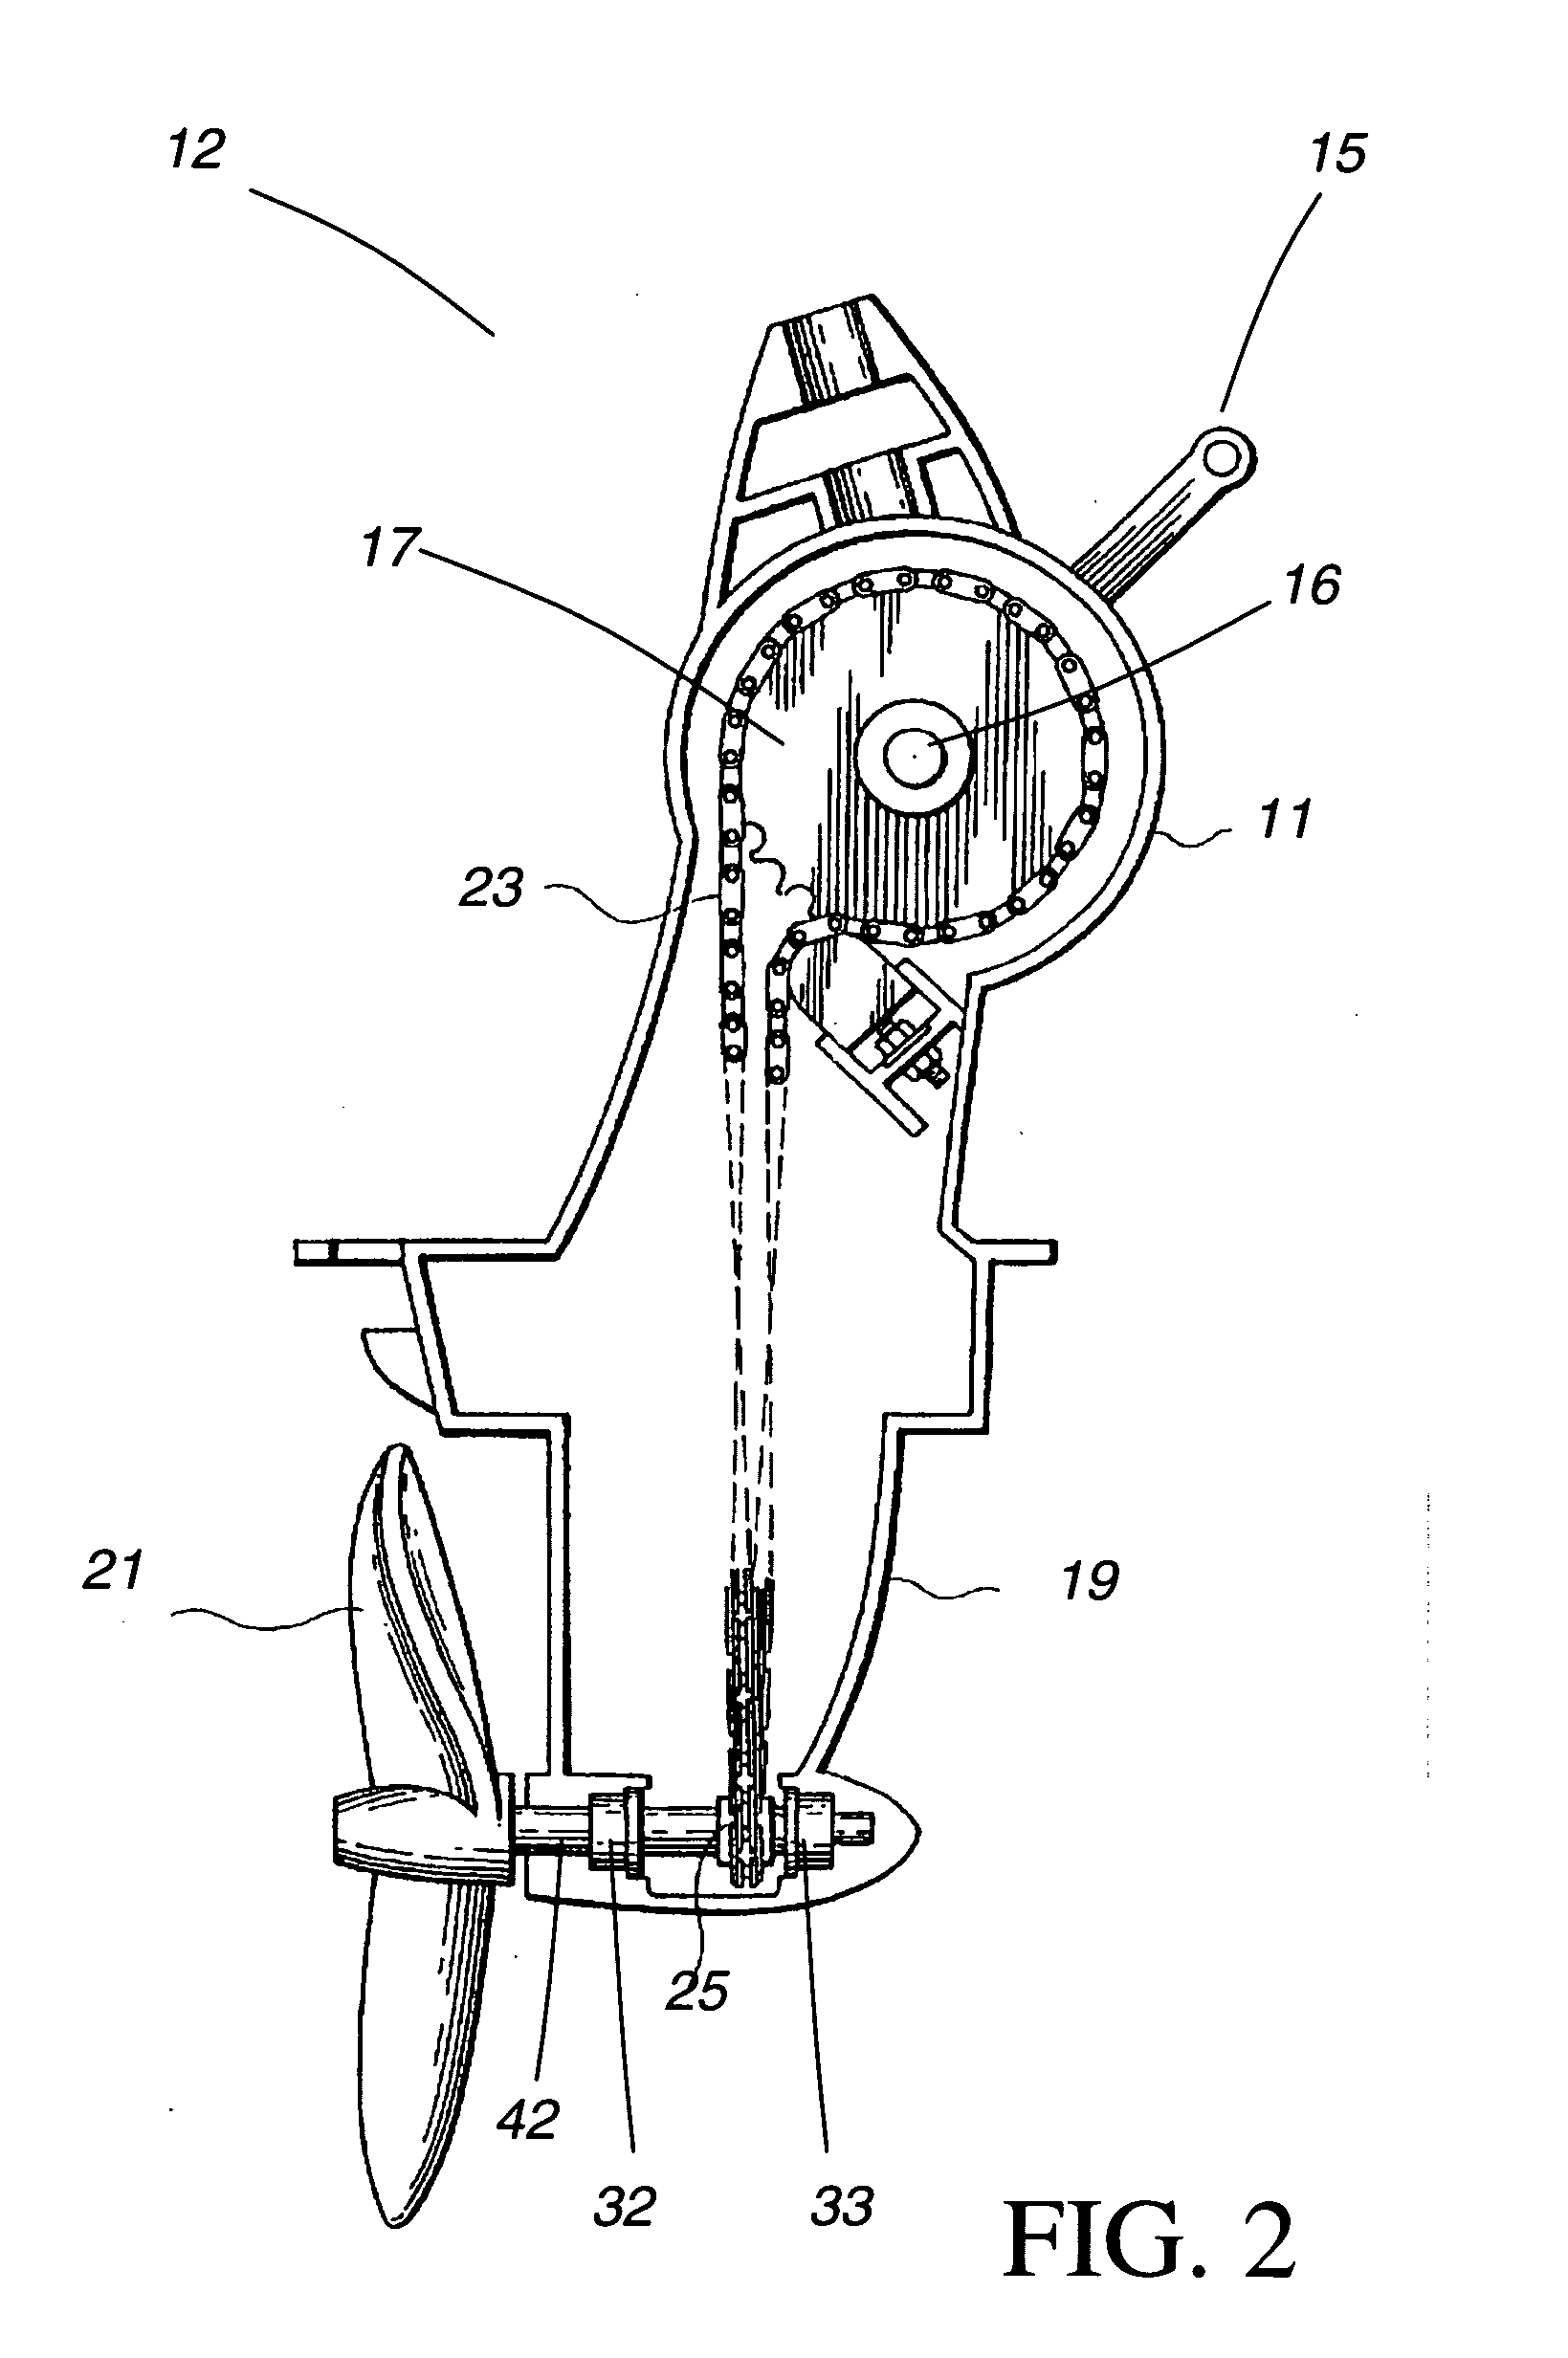 Electric Motor Assisted Propulsion System for Human-Powered Watercraft